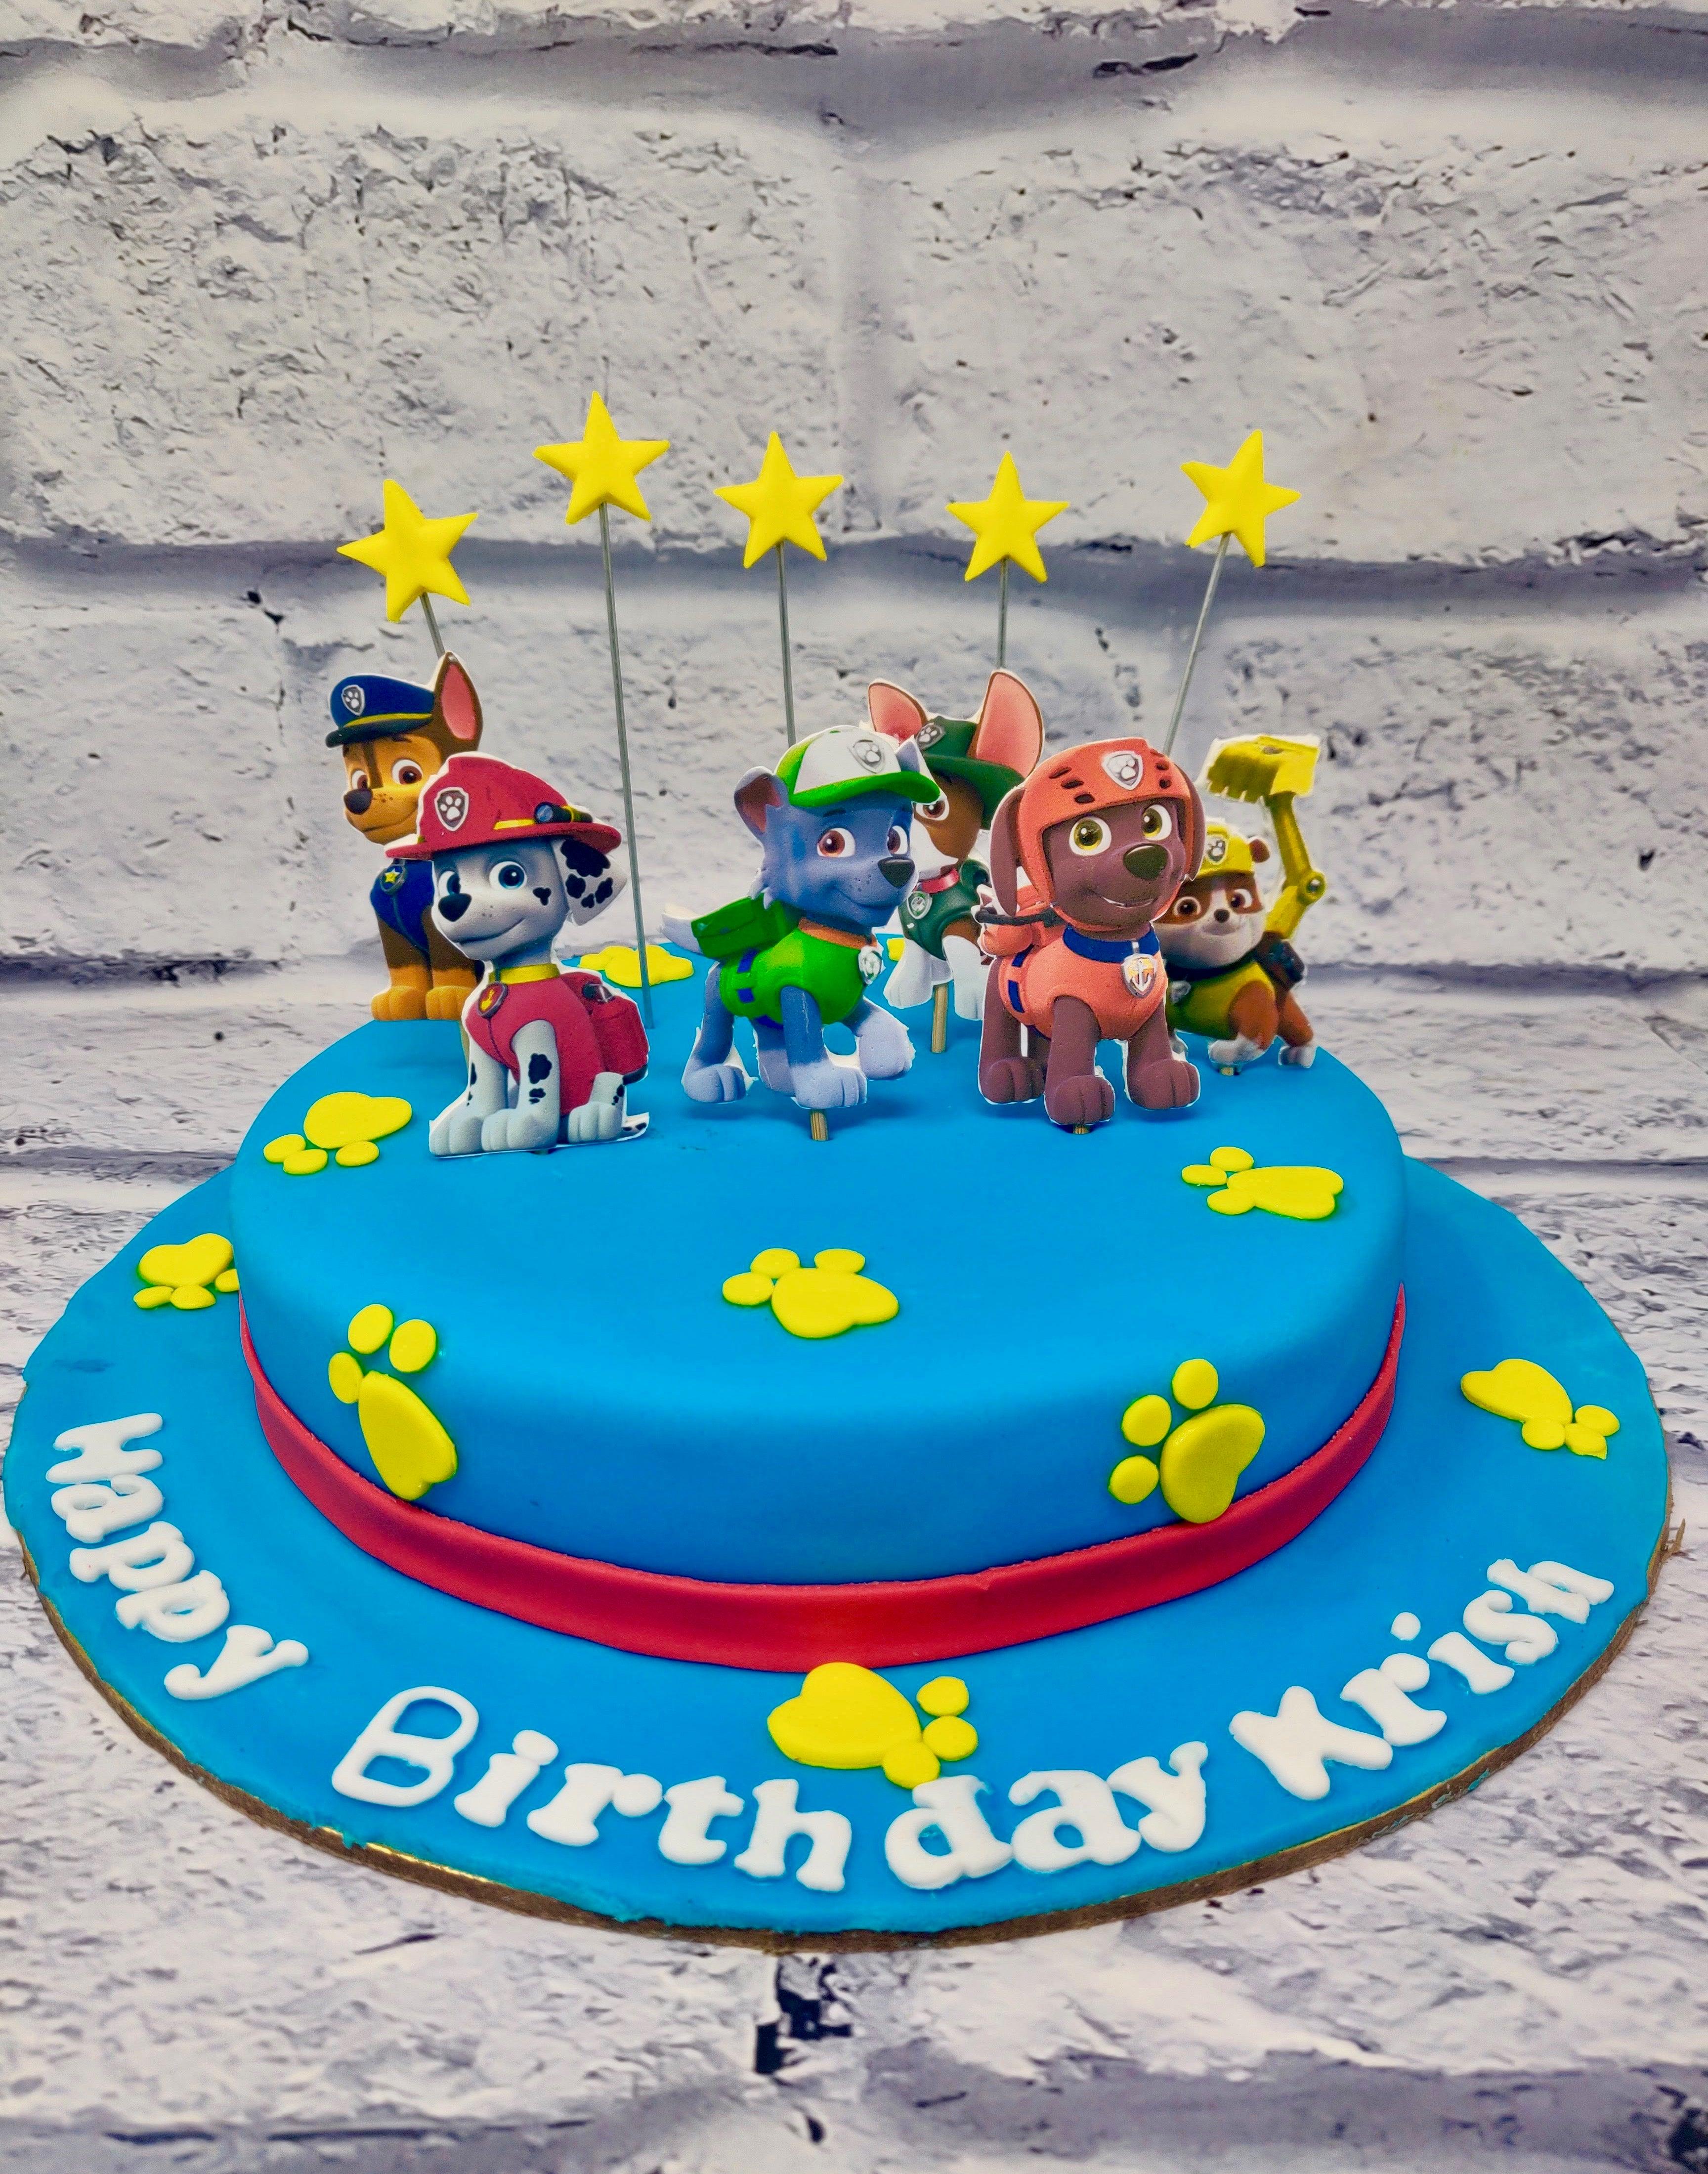 Paw Patrol Themed Cupcakes | Baked by Nataleen